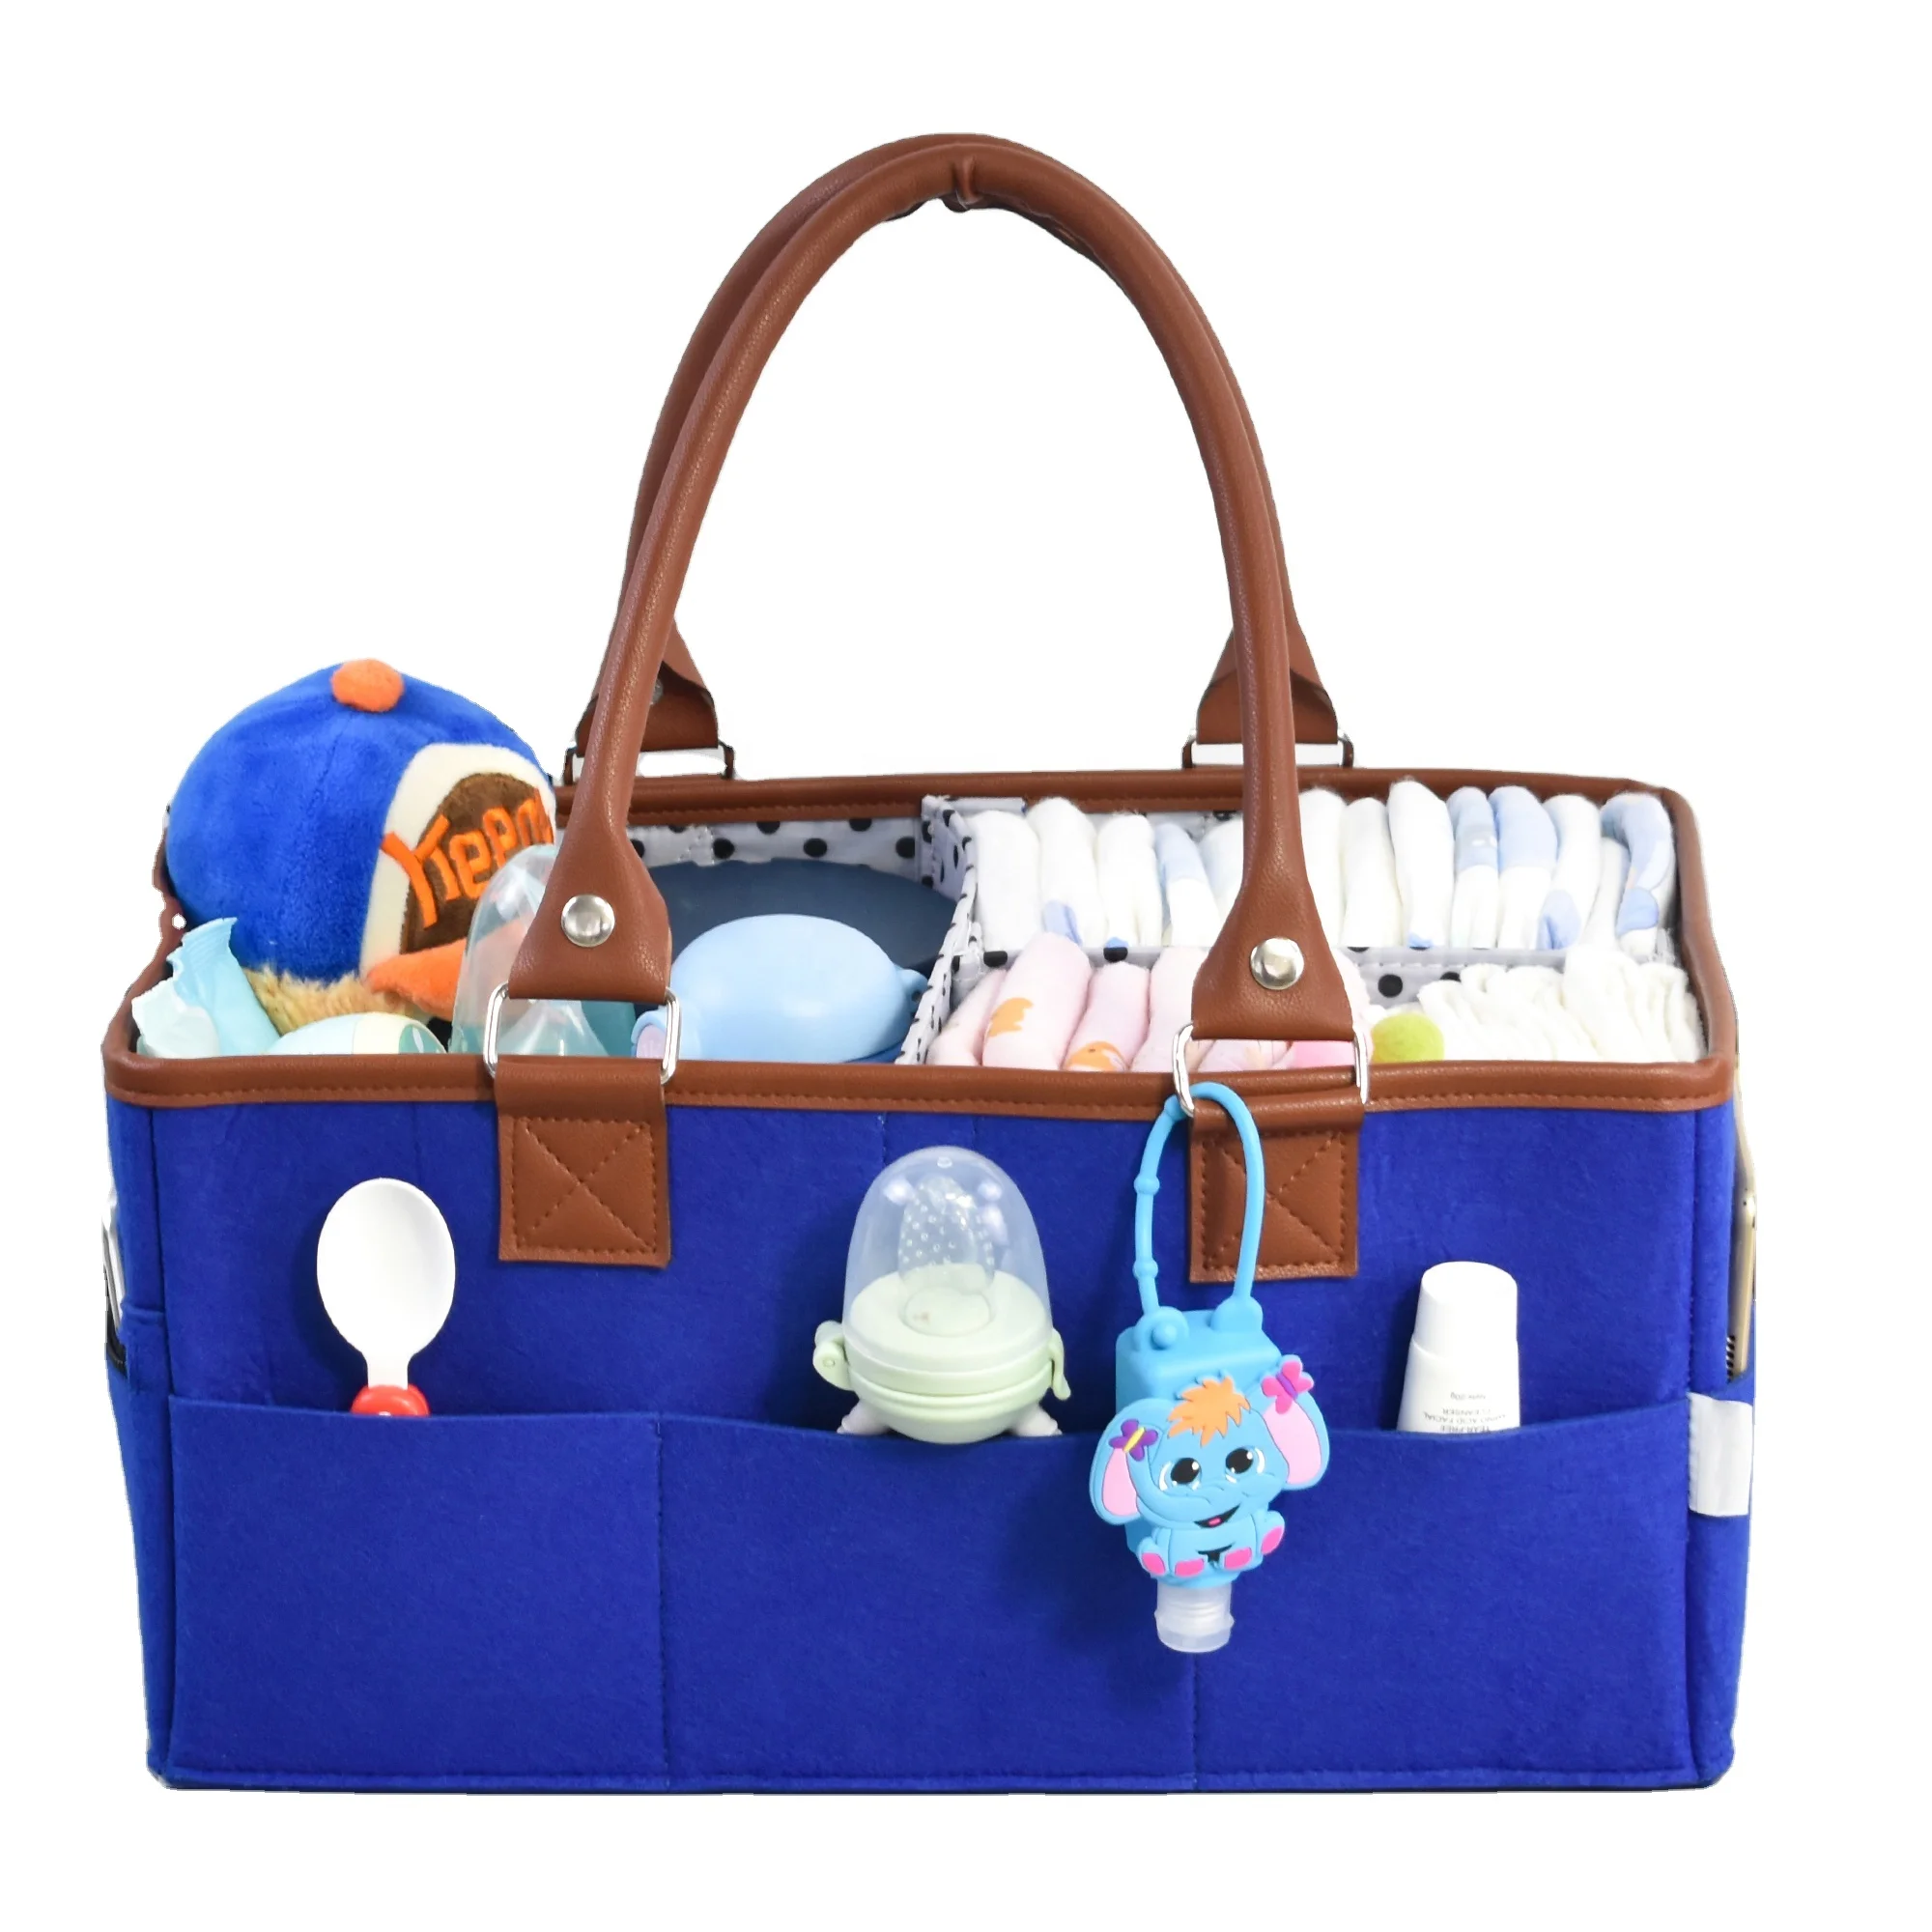 

Large Capacity Waterproof with changing mat Space saving felt diaper caddy organizer for mommy, Customized colors